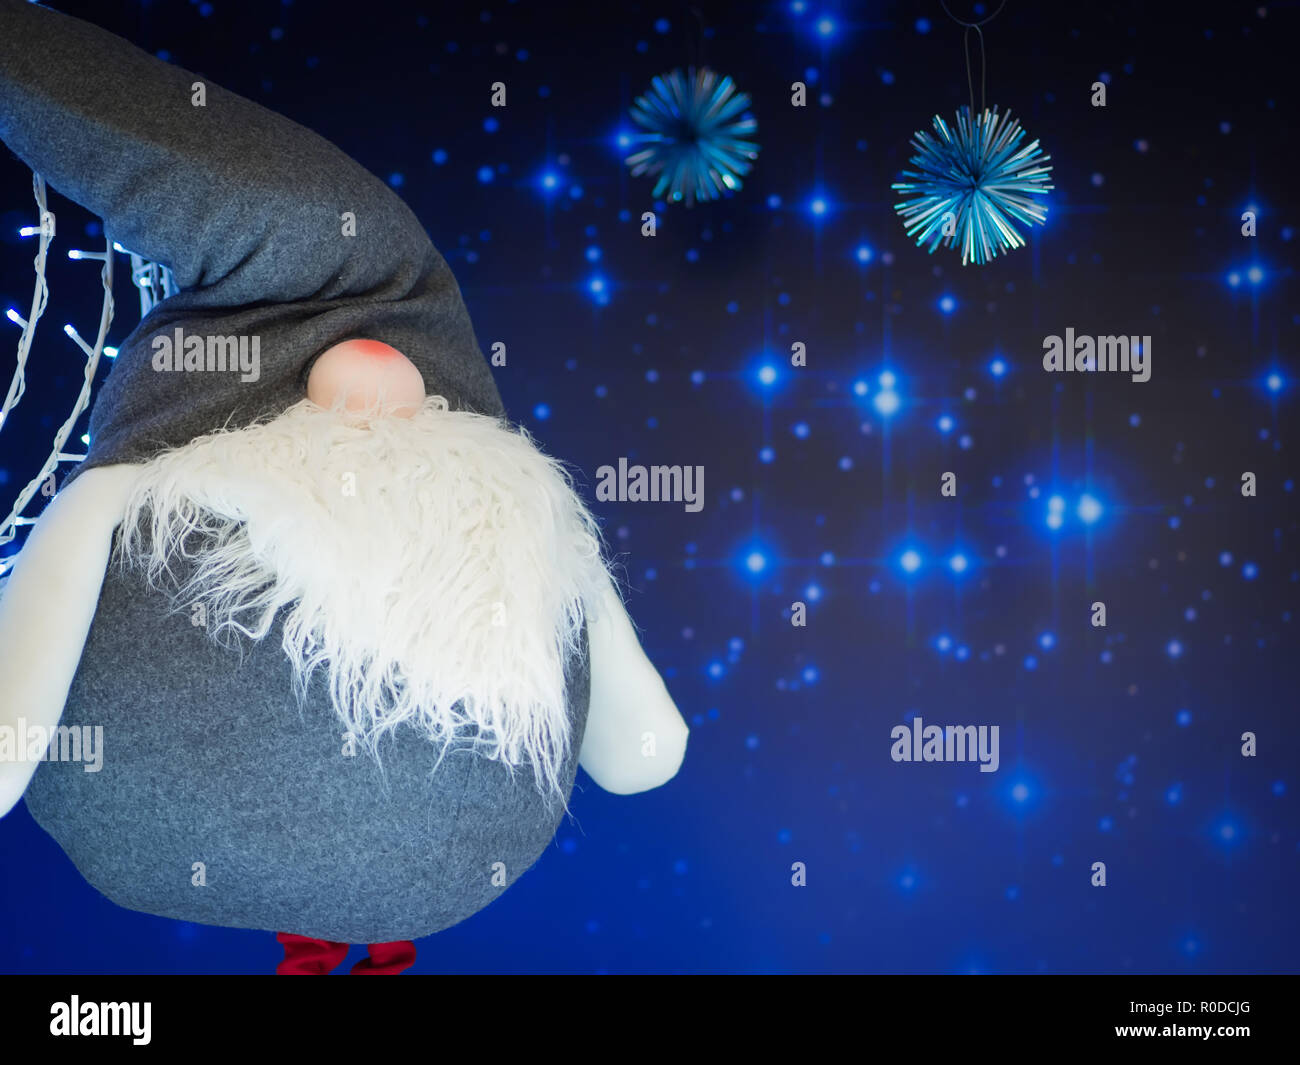 A soft elf toy standing against starry dark blue background. Christmas and New Year concept. Stock Photo